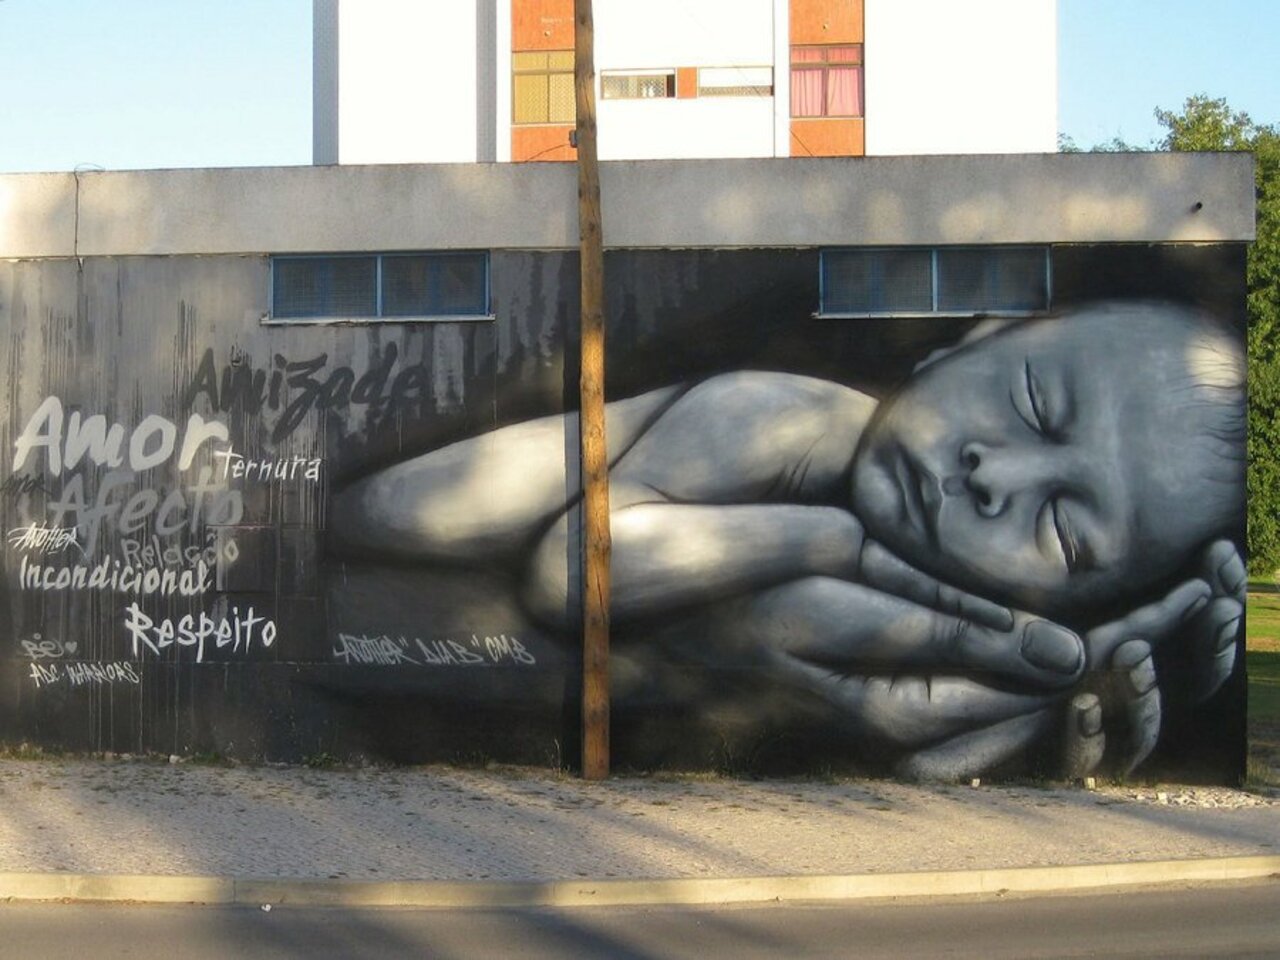 This mural is a lovely testament to the unconditional love of a parent for their child ❤️ -- Piece by Rod Santos aka #Another (http://globalstreetart.com/another). -- #globalstreetart #streetart #art #graffiti https://t.co/lF5wDiNXcO